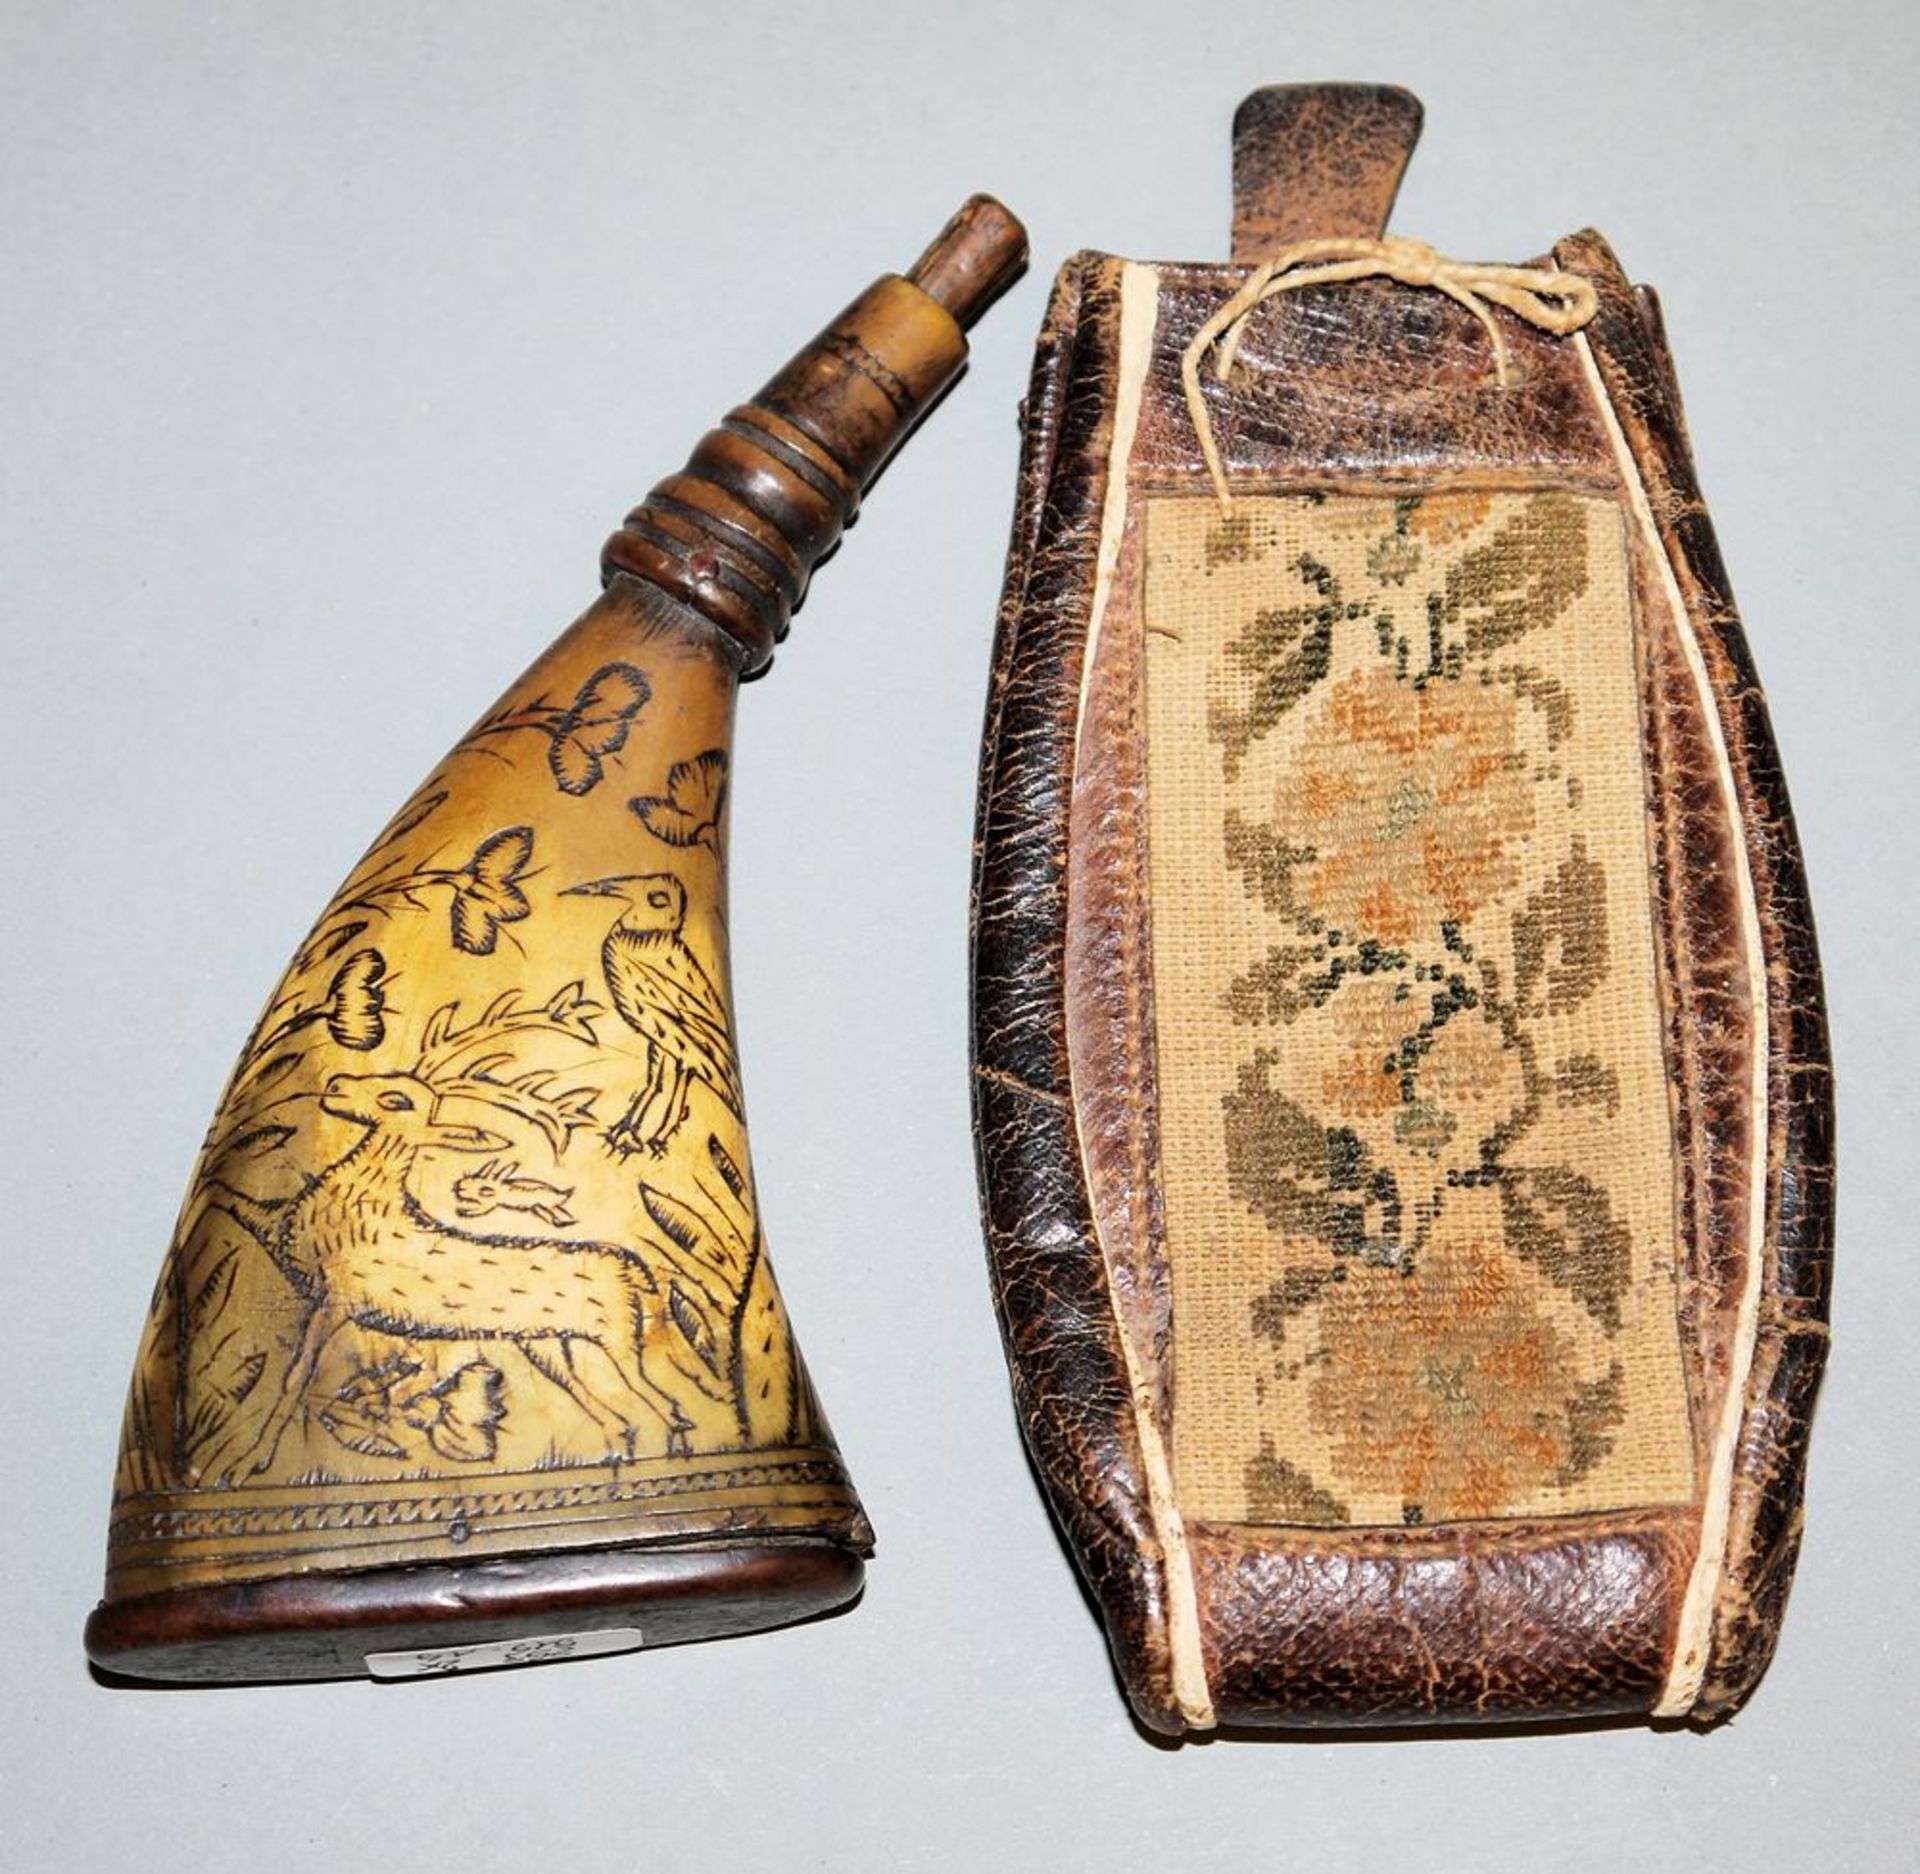 Powder horn and leather börse, 17th-19th c.